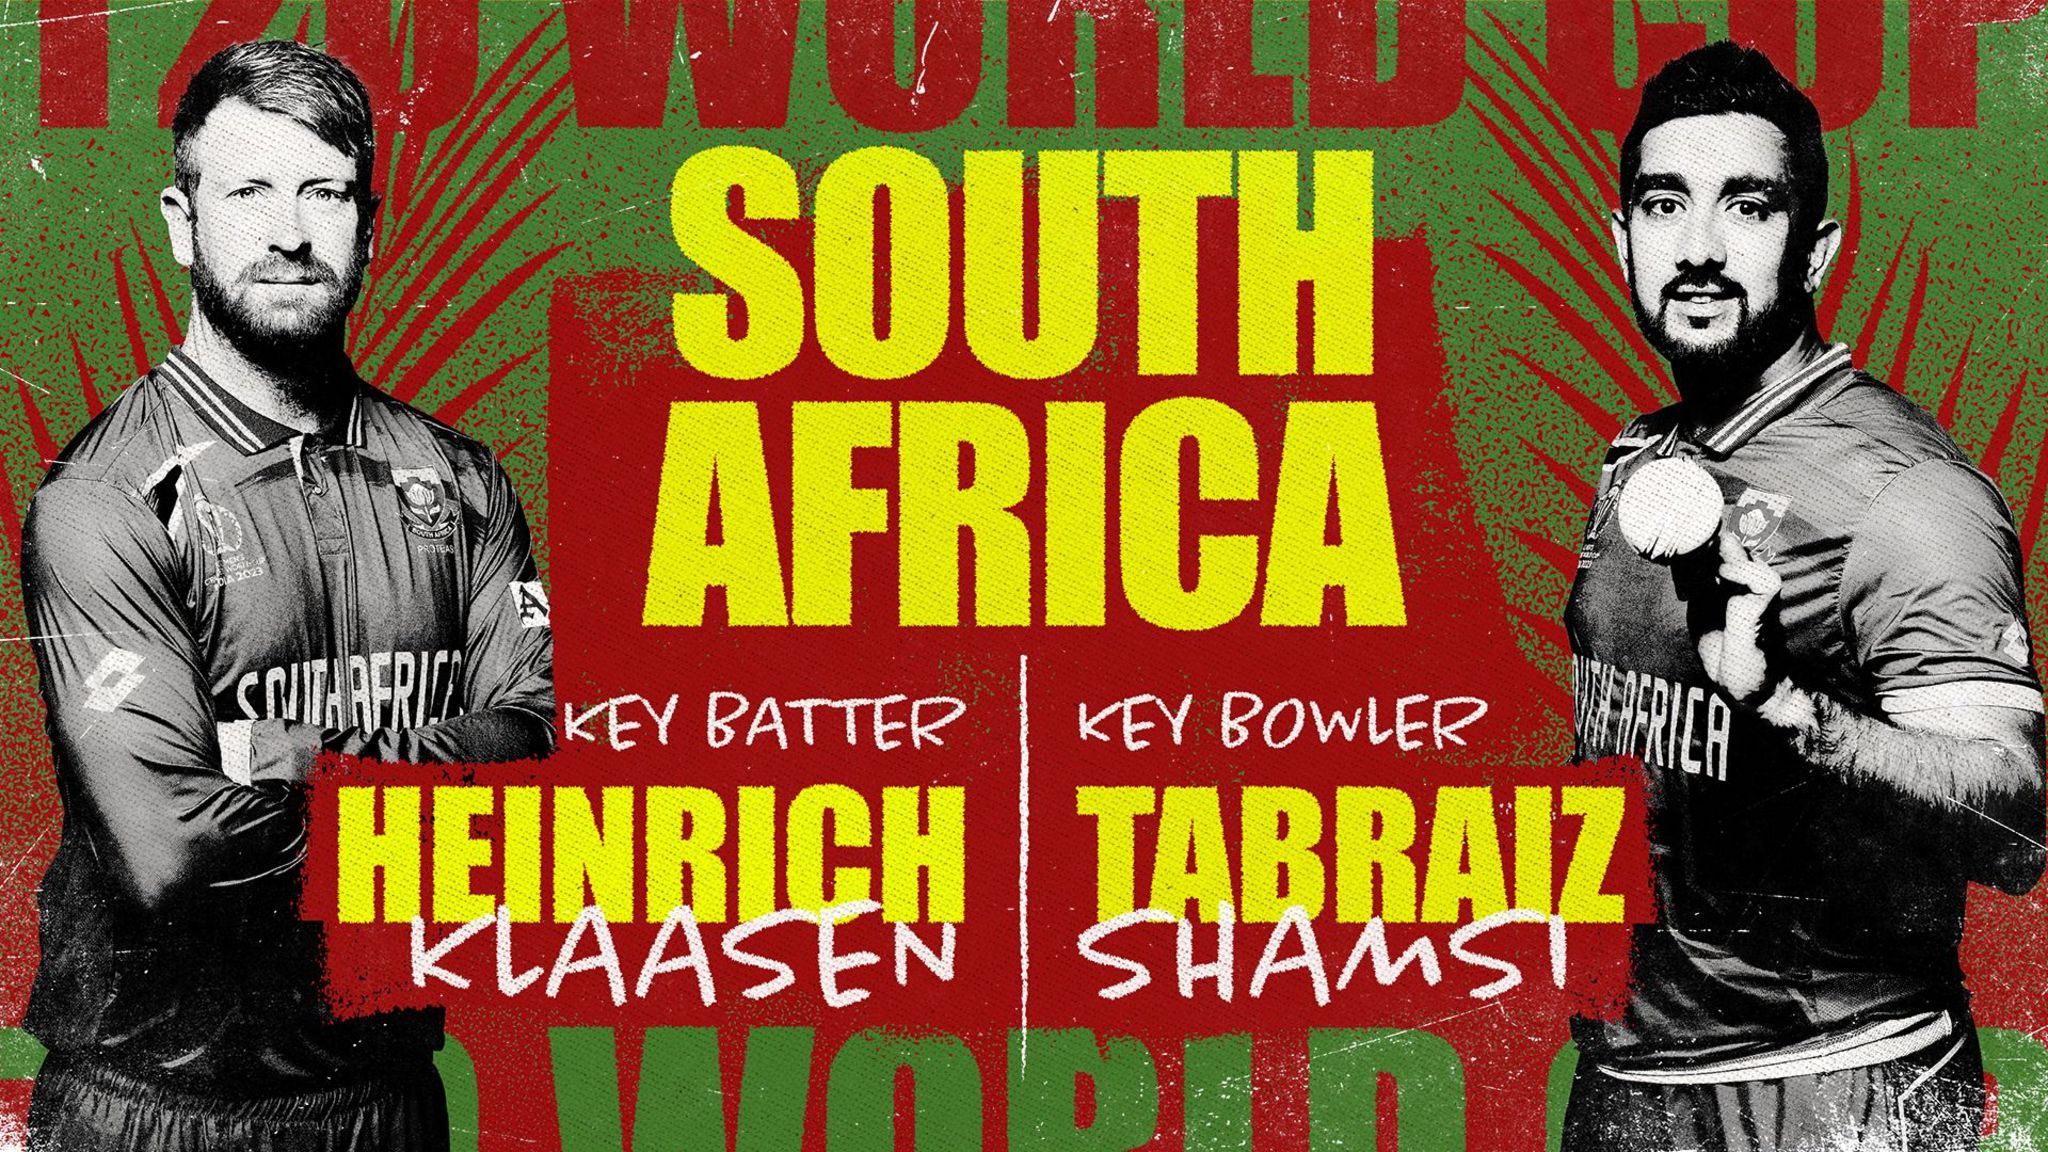 A graphic showing Heinrich Klaasen and Tabraiz Shamsi as South Africa's key batter and bowler at the Men's T20 World Cup